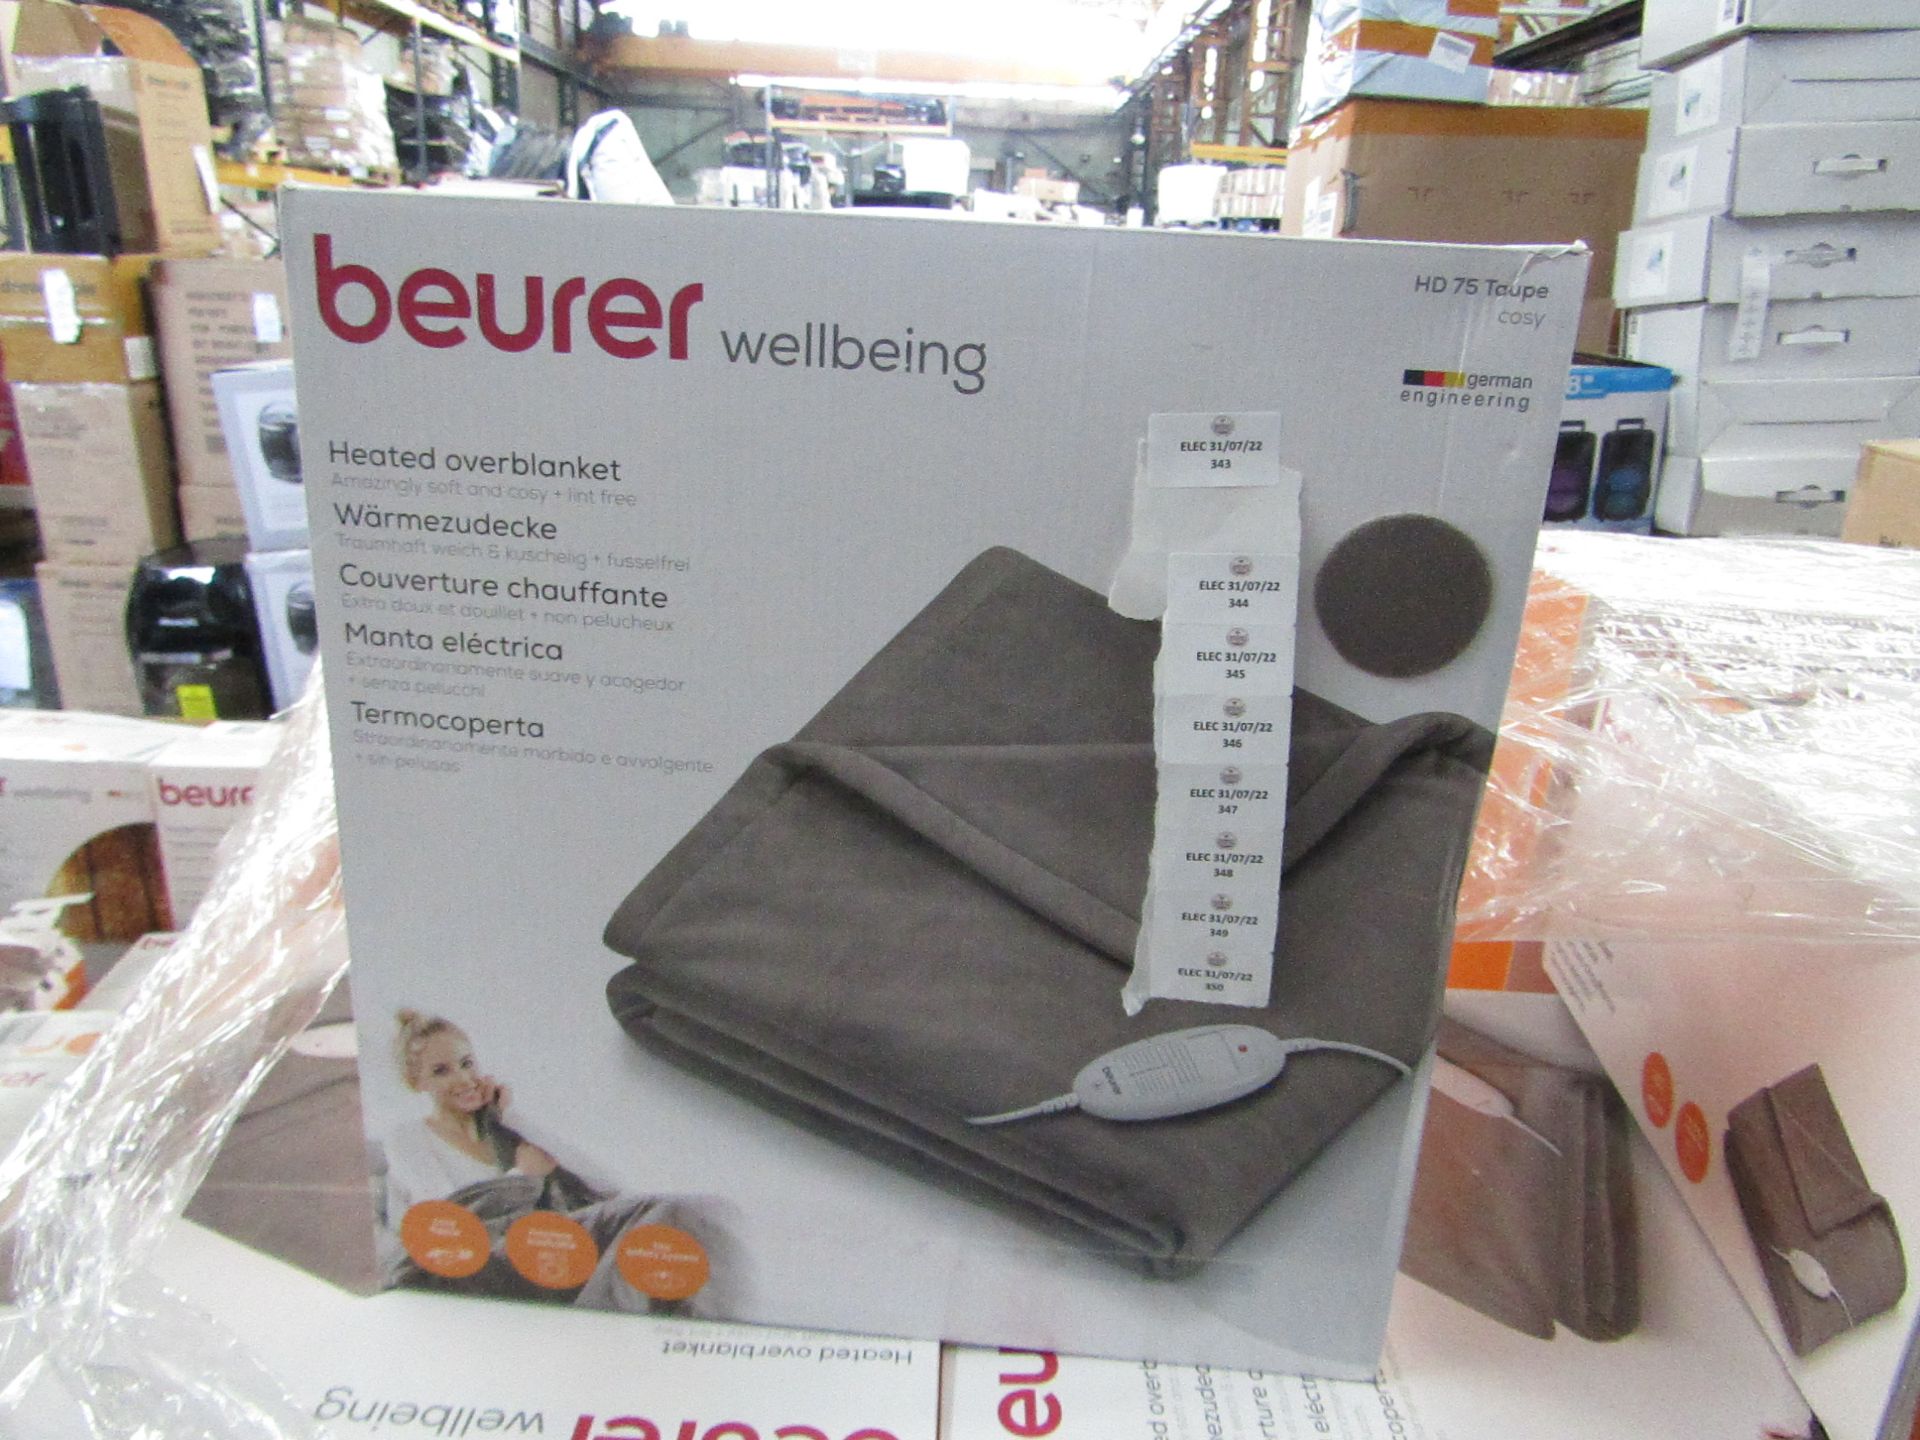 1x Beurer Heated Overblanket HD75 - This item is graded B - RRP œ60